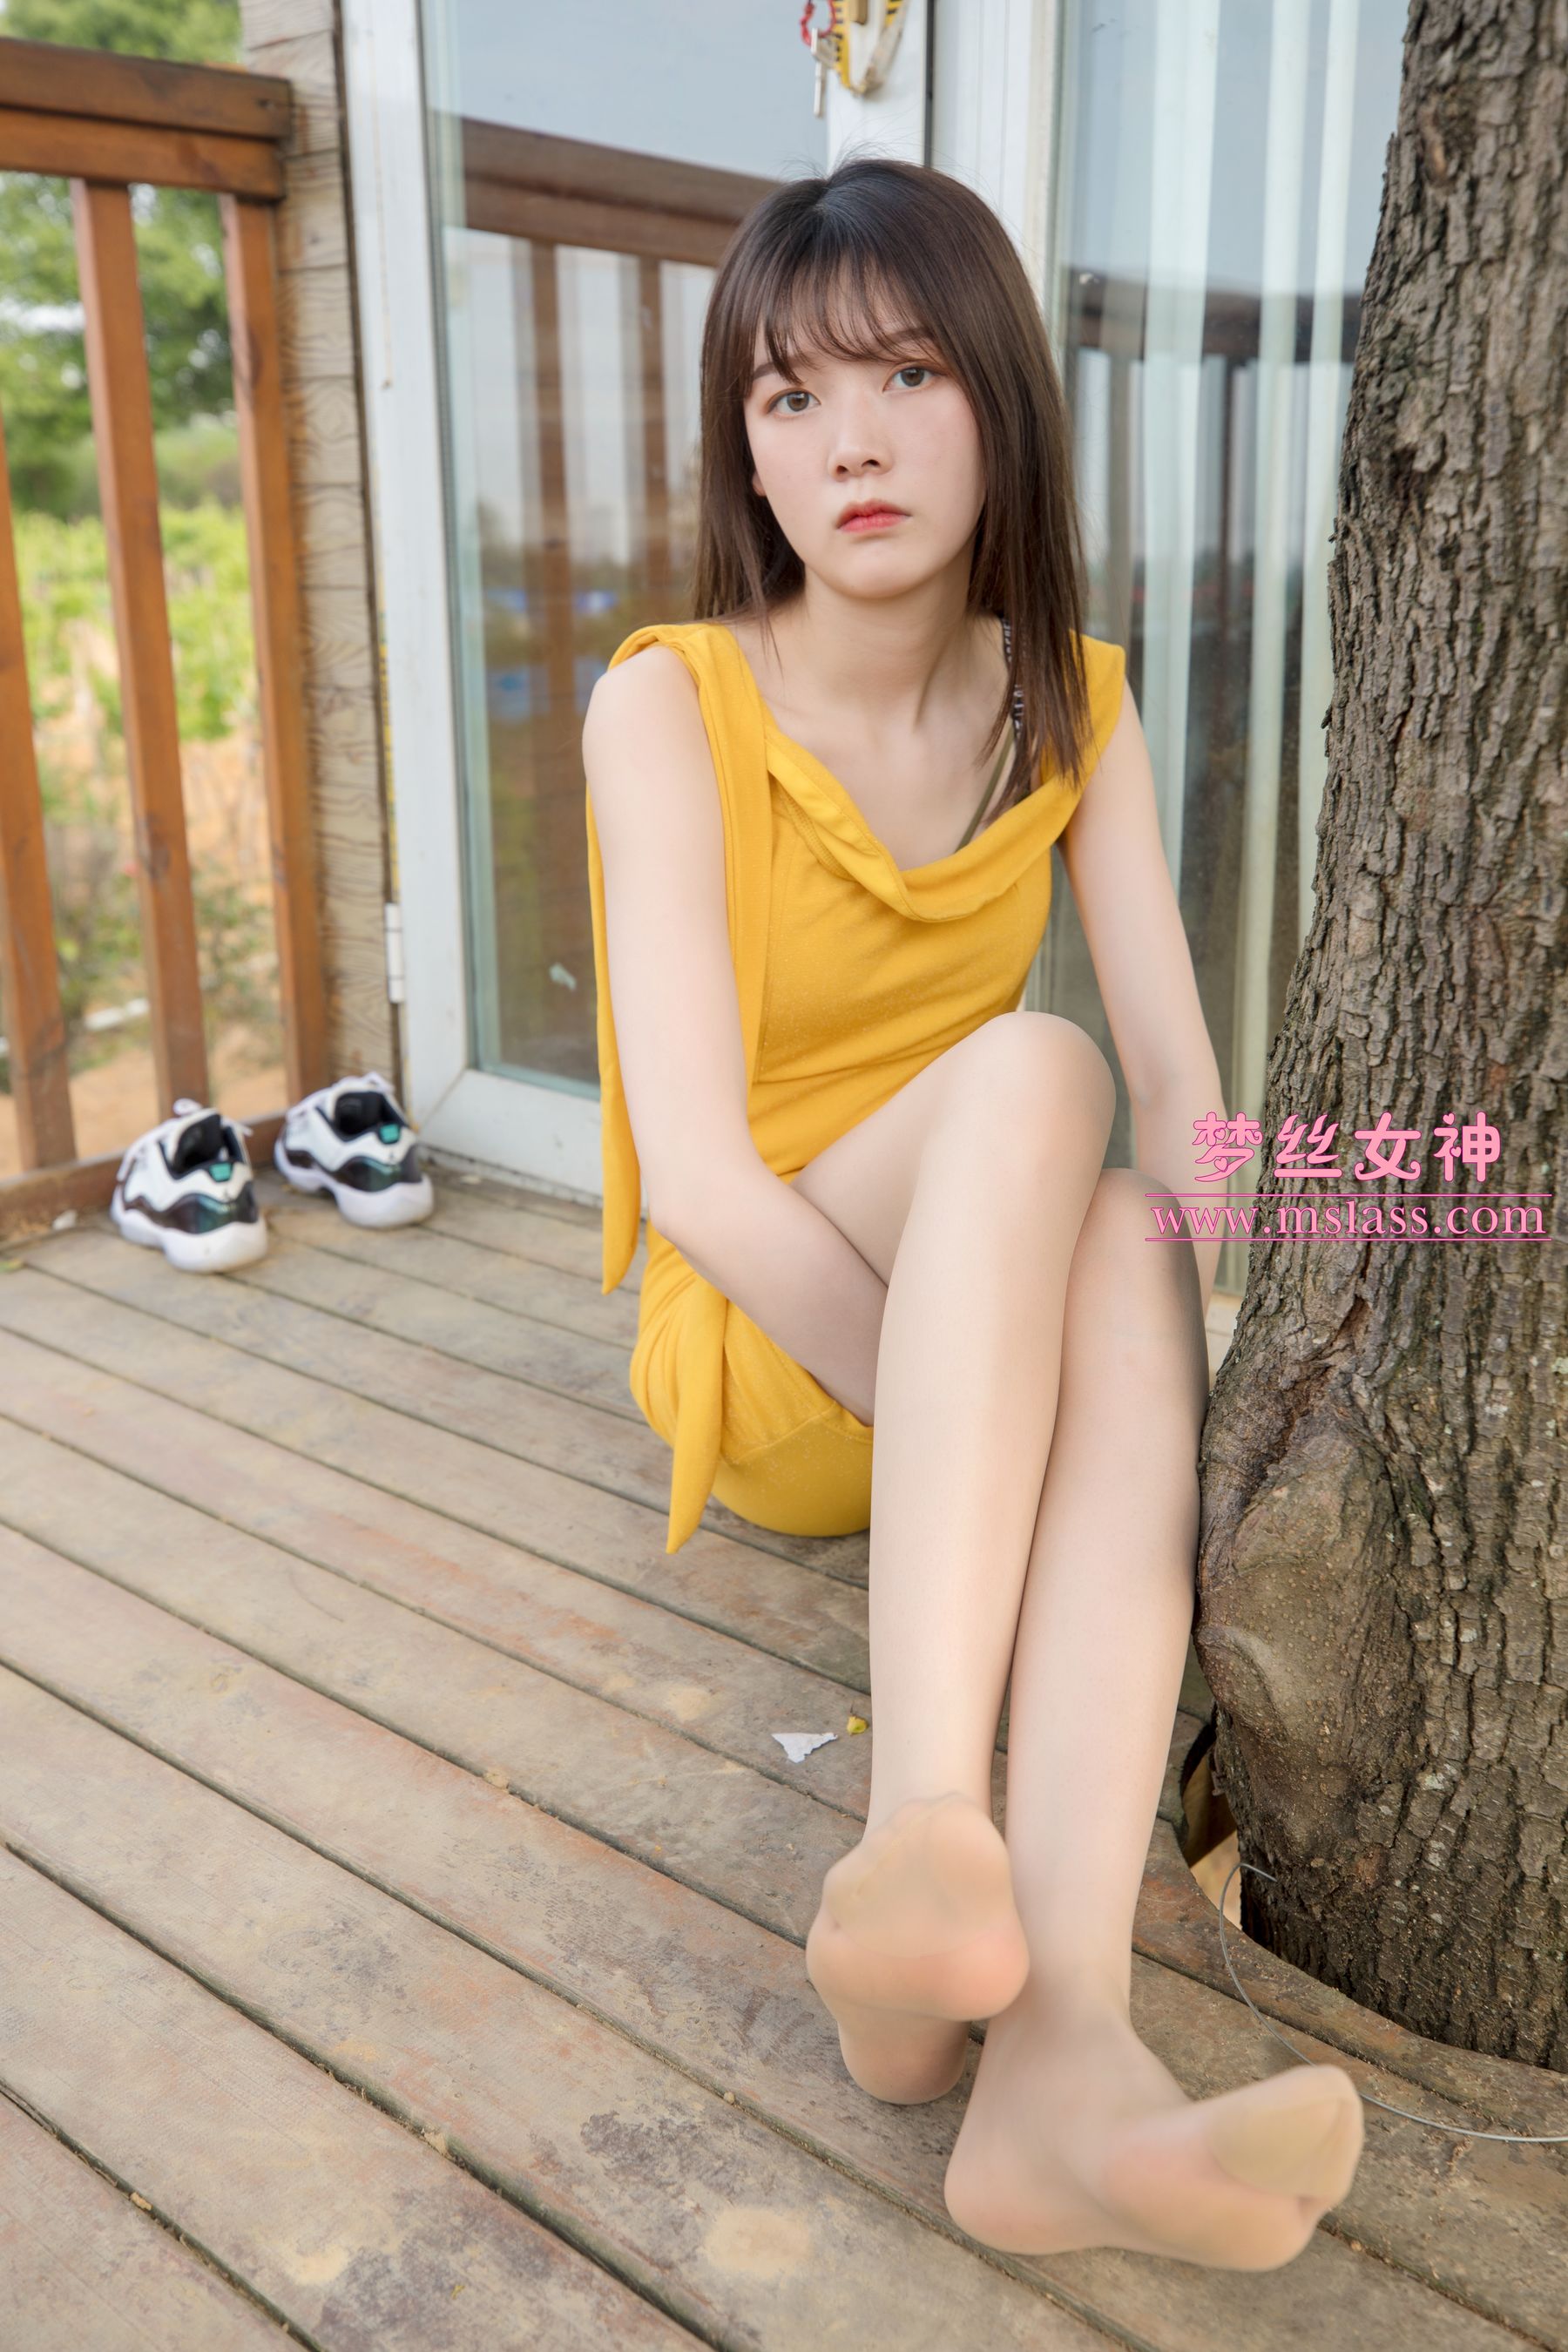 [MSLASS] Zhang Simin's sweet and beautiful legs in stockings Page 69 No.99e229